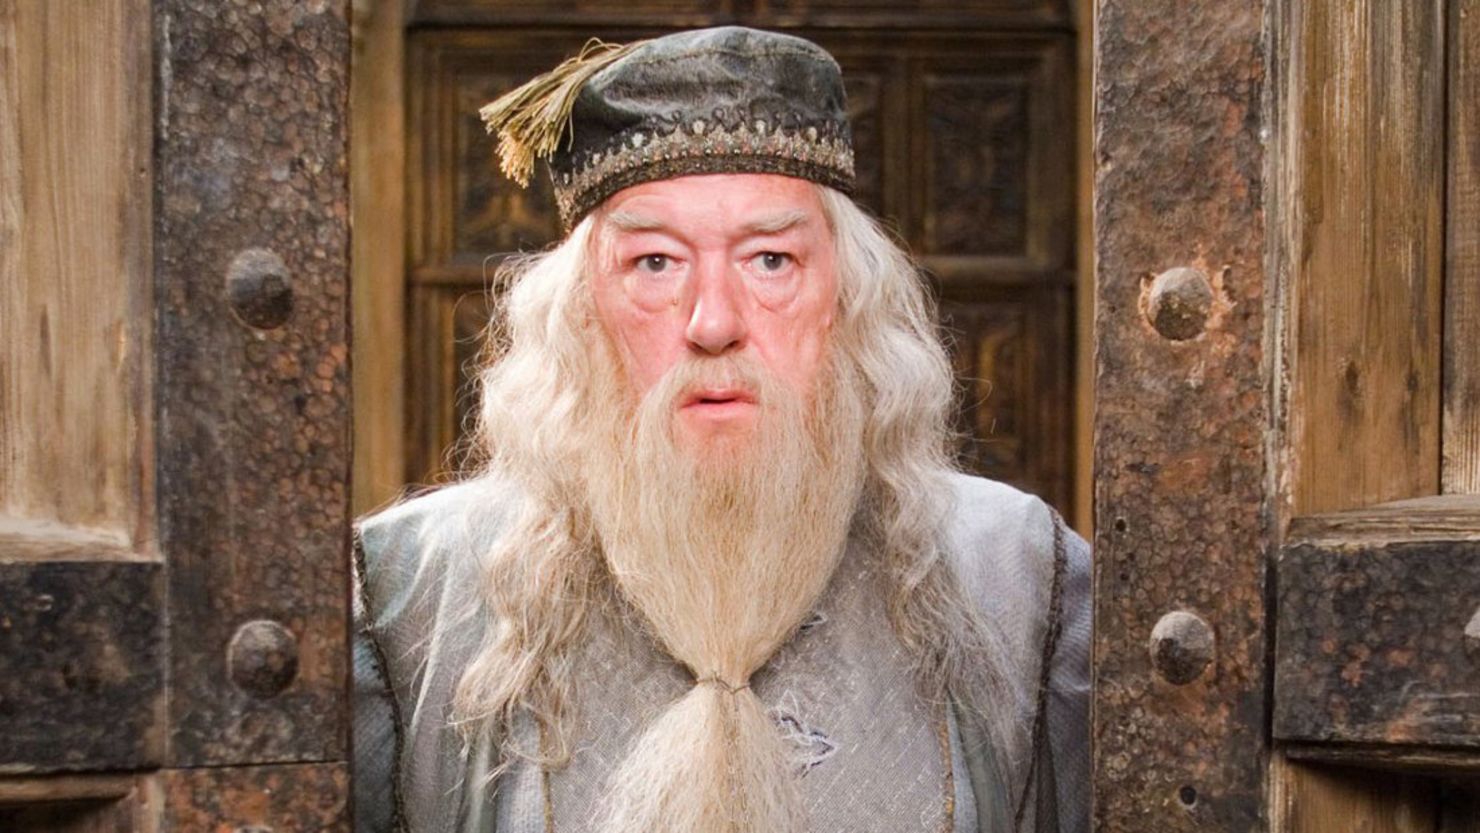 Michael Gambon took over the role of Dumbledore in the later "Potter" films. 